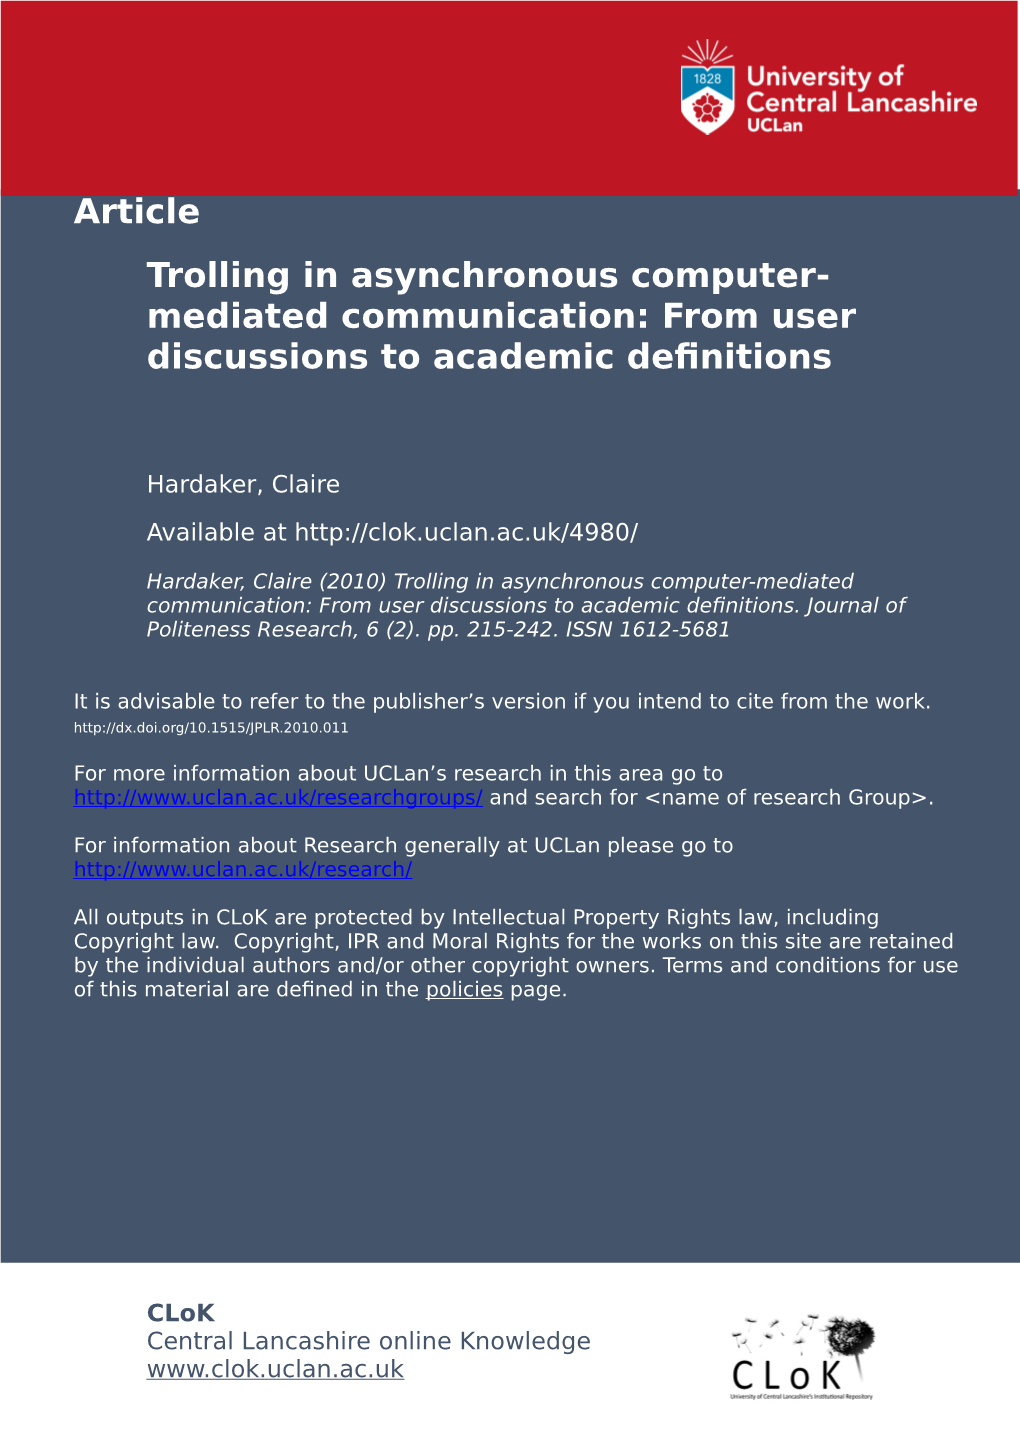 Trolling in Asynchronous Computer- Mediated Communication: from User Discussions to Academic Definitions